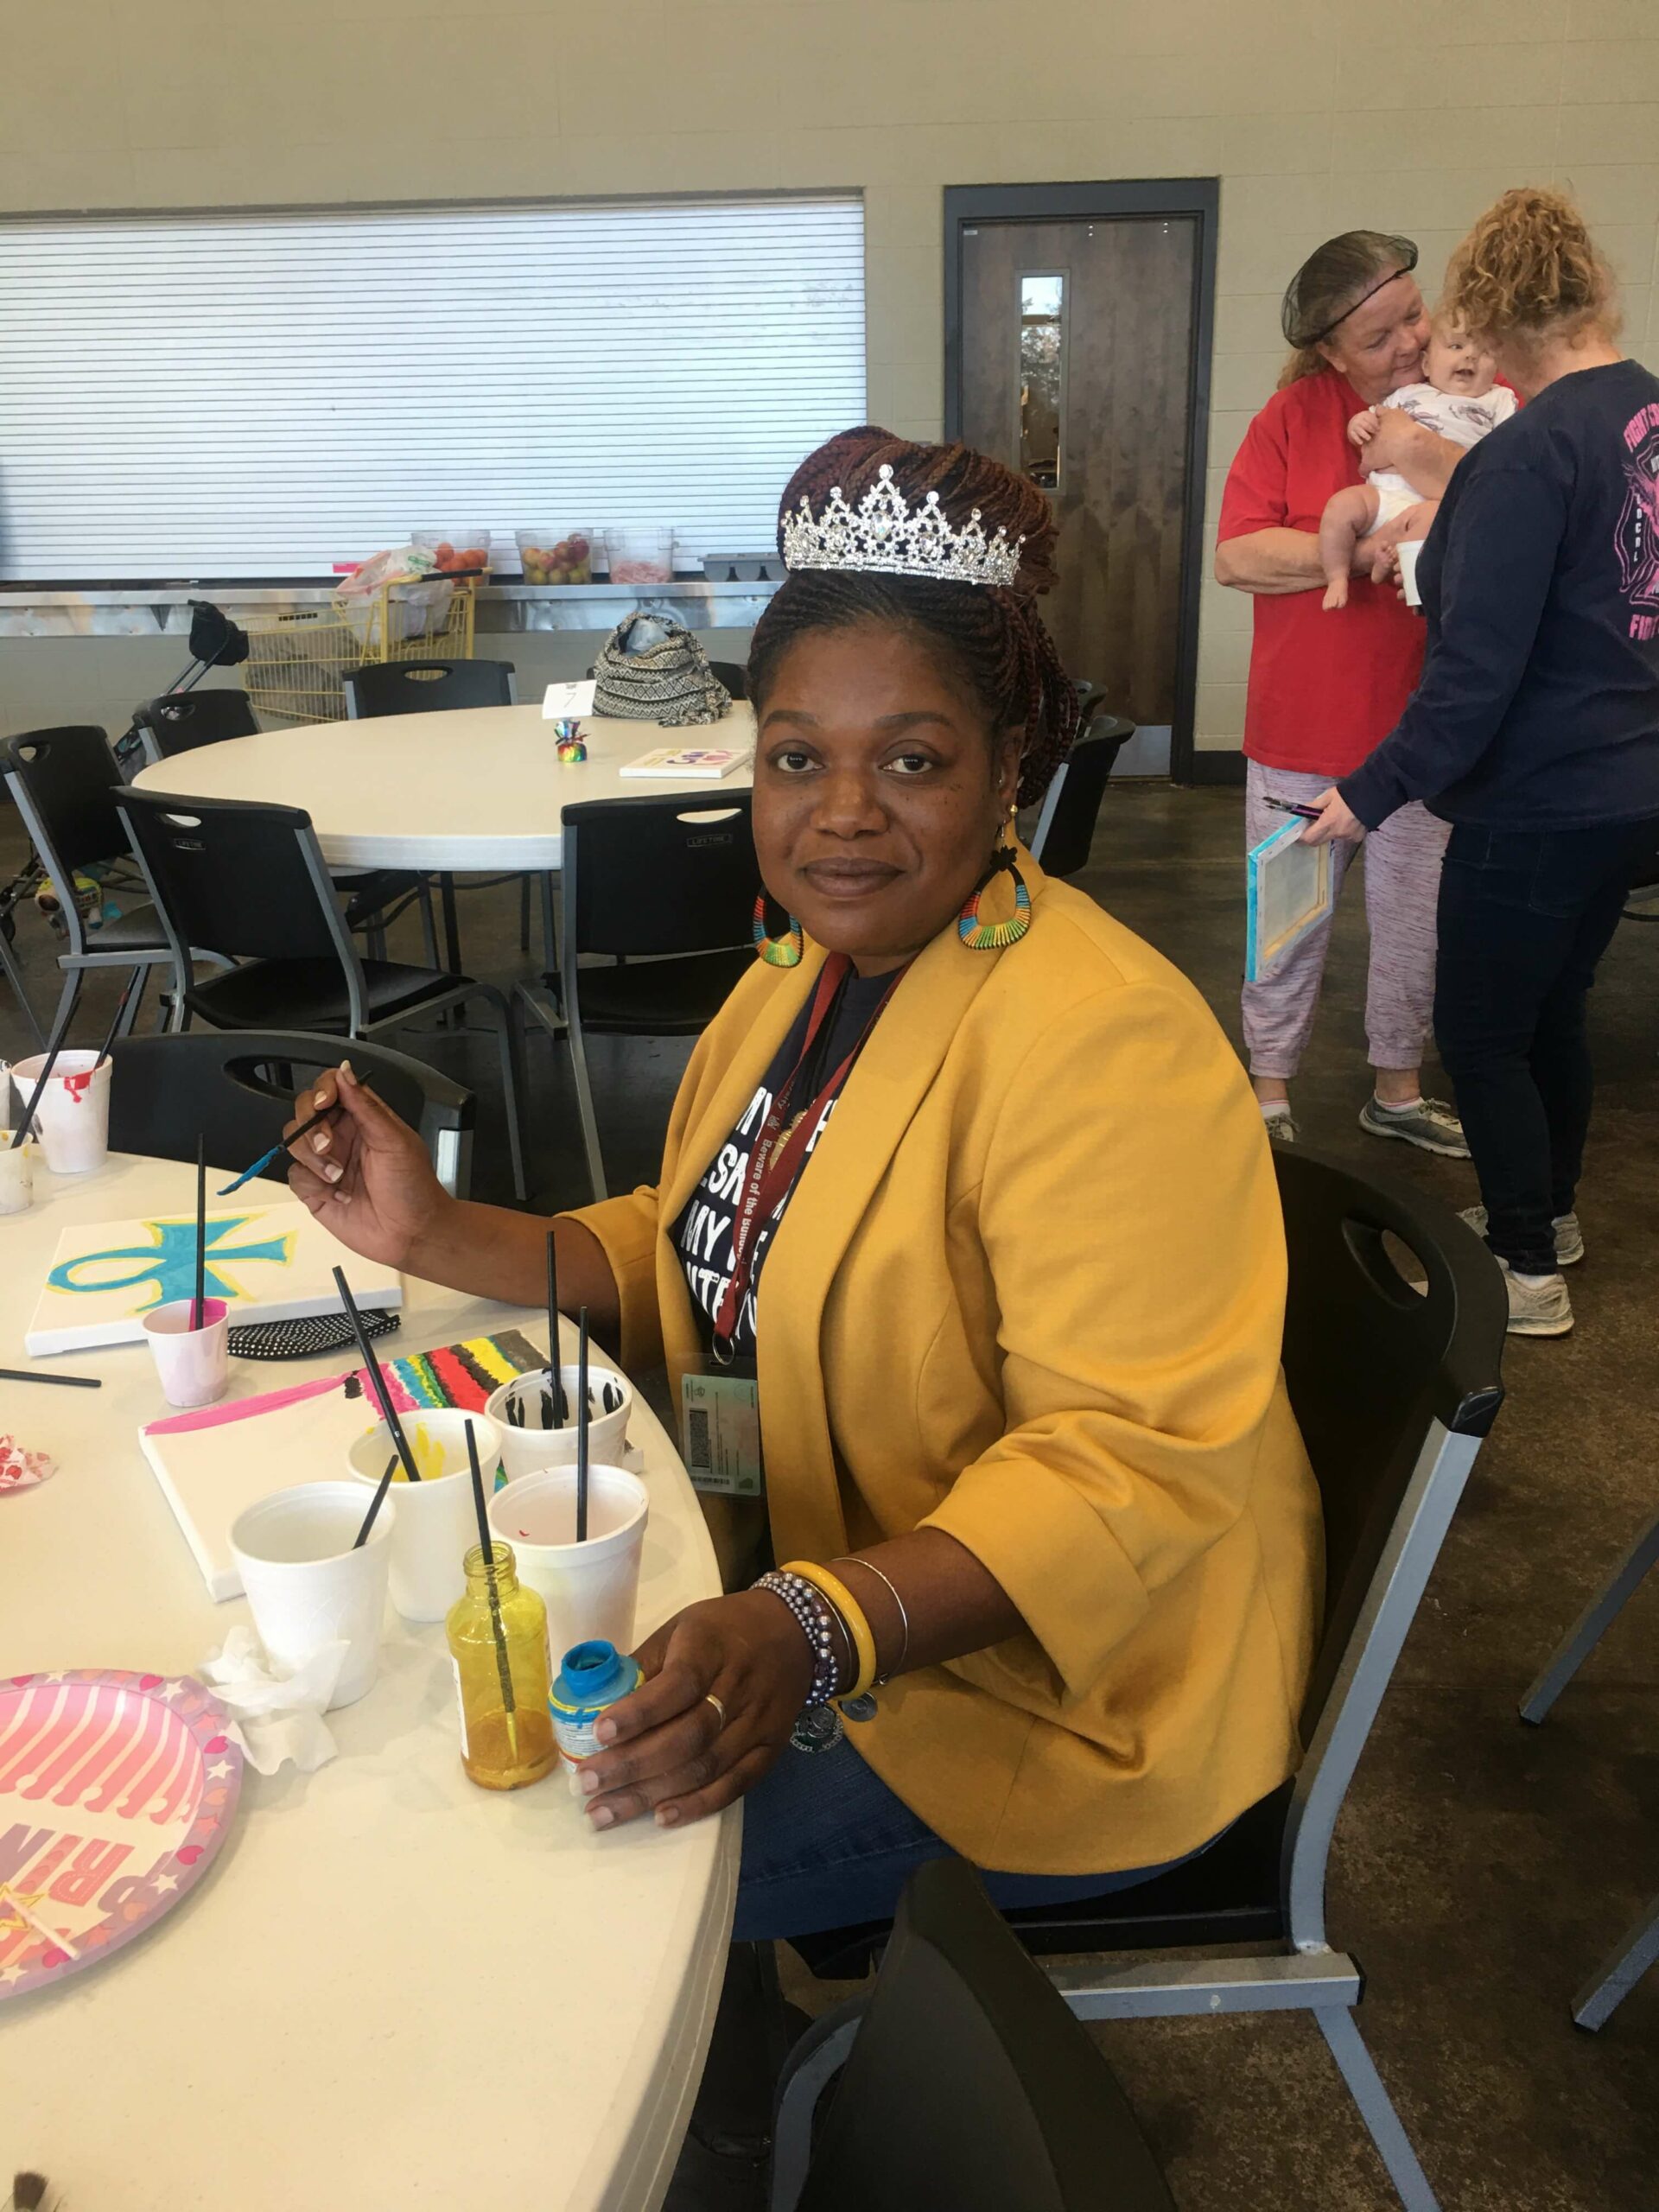 A picture of a volunteer smiling and painting at a Paint Party event.